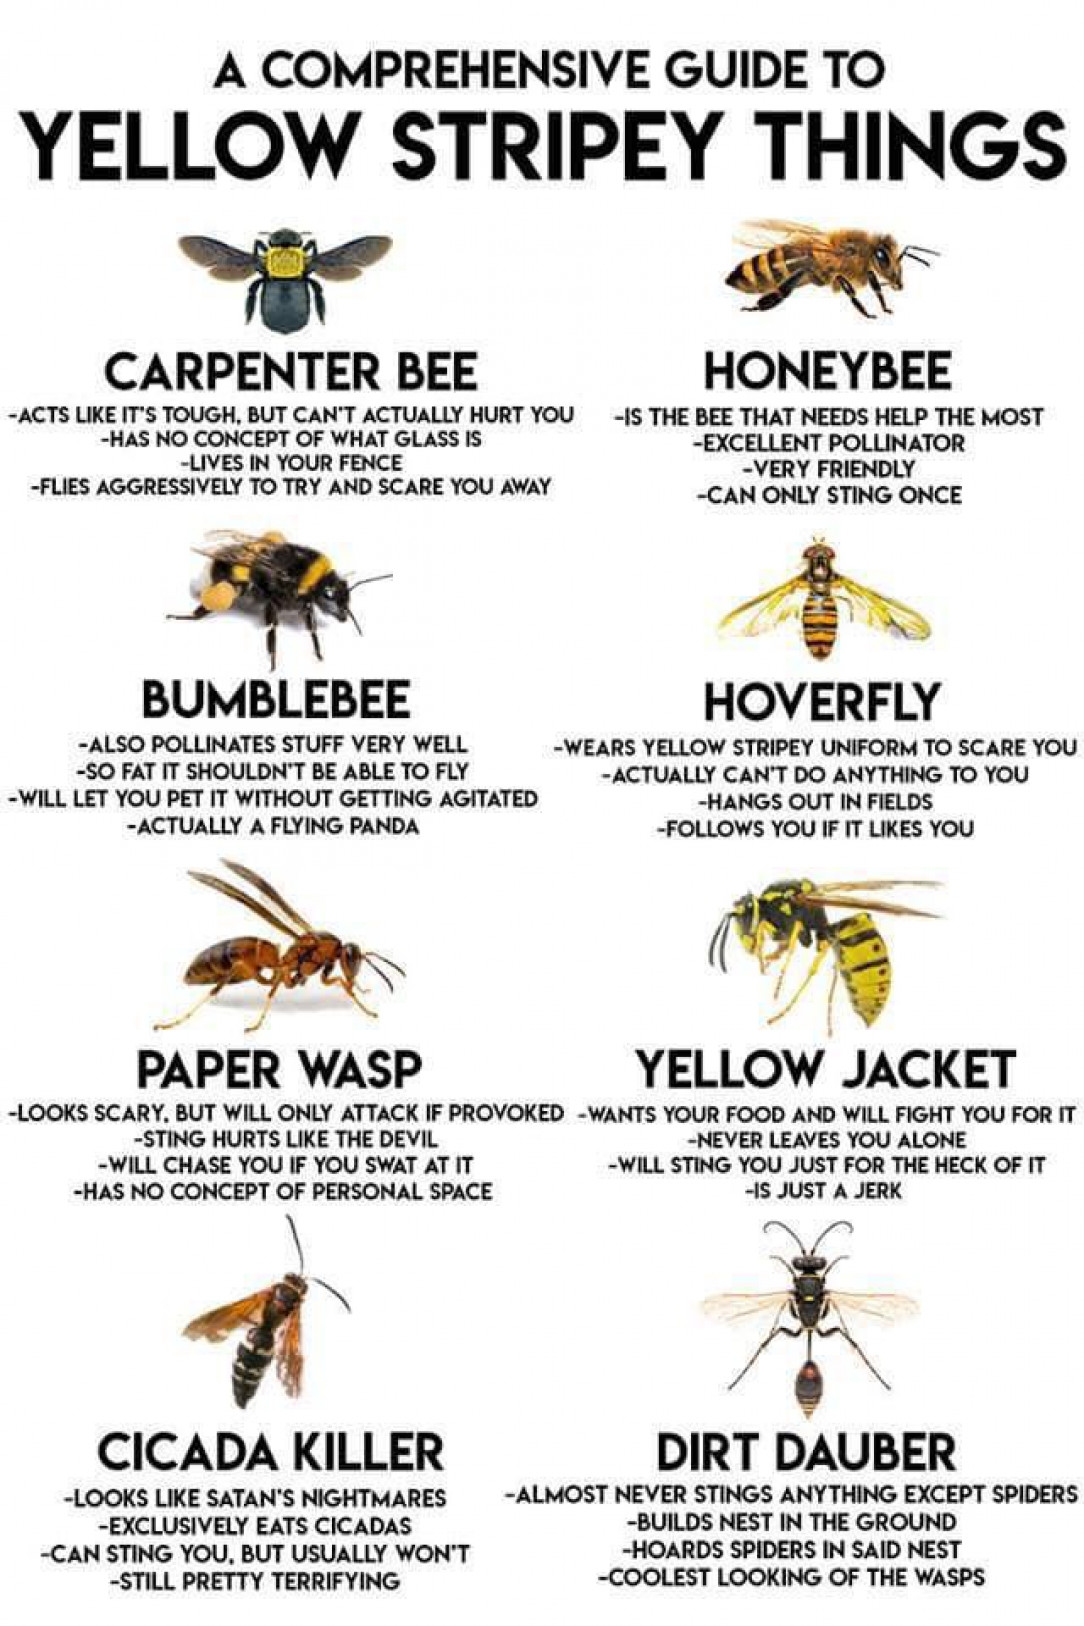 Guide to Yellow Stripey Things